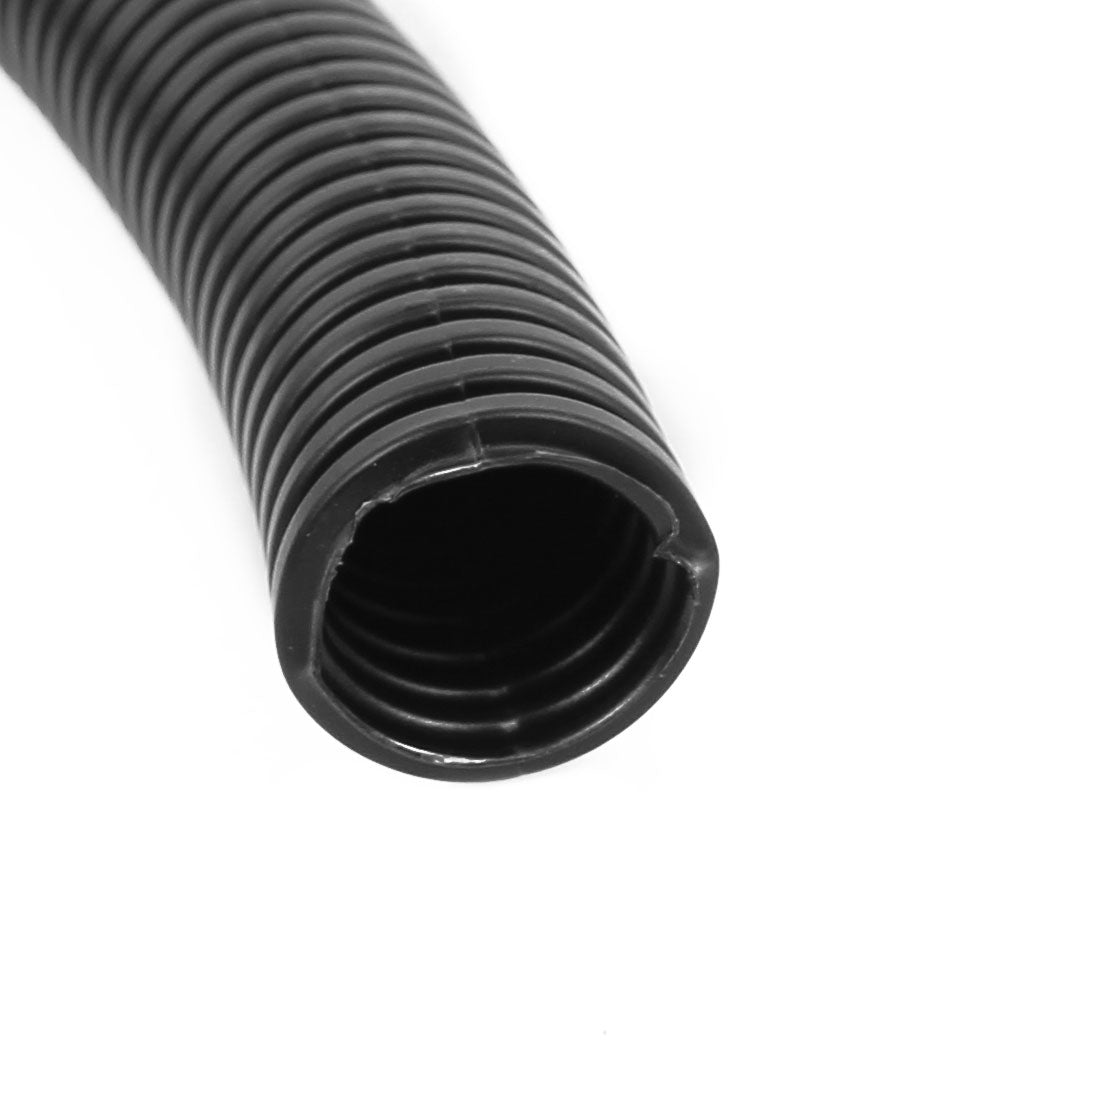 uxcell Uxcell 10 M 12 x 15.8 mm PE Flexible Corrugated Conduit Tube for Garden,Office Black